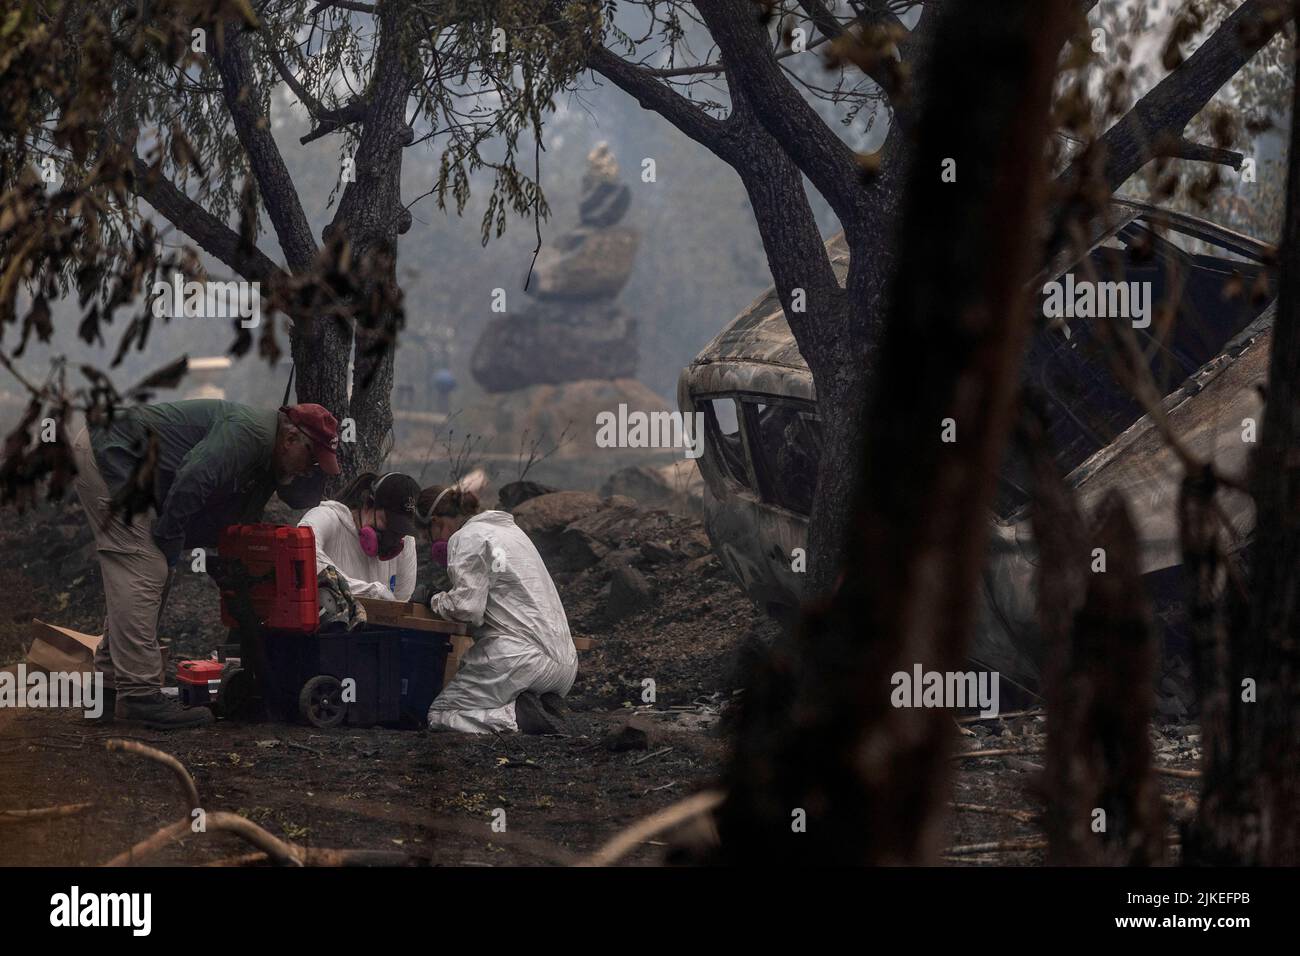 Forensic anthropologists look for human remains in a damaged vehicle as the McKinney Fire burns near Yreka, California, U.S., August 1, 2022. REUTERS/Carlos Barria Stock Photo